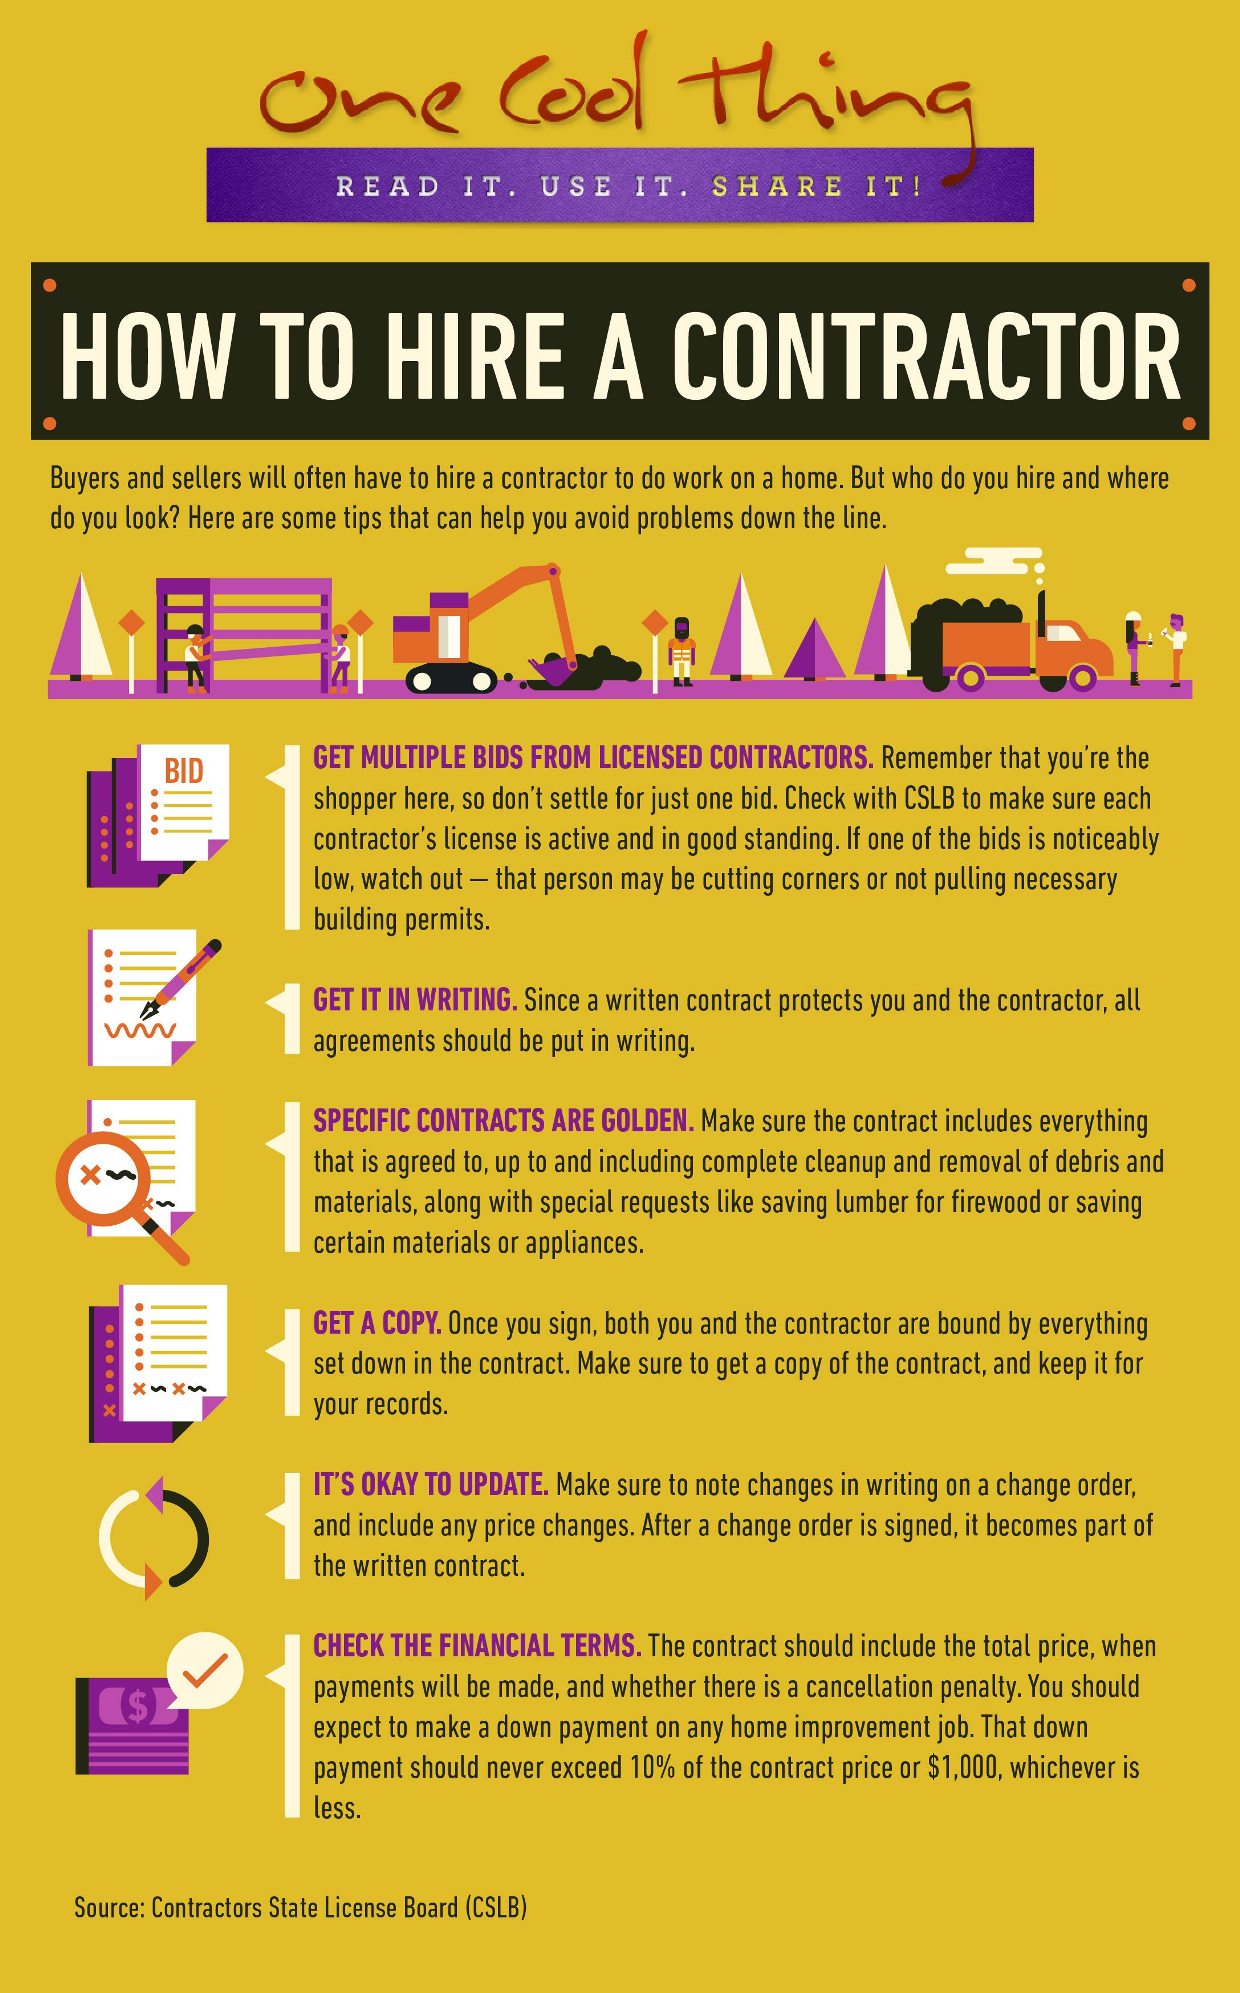 How-to-hire-a-contractor